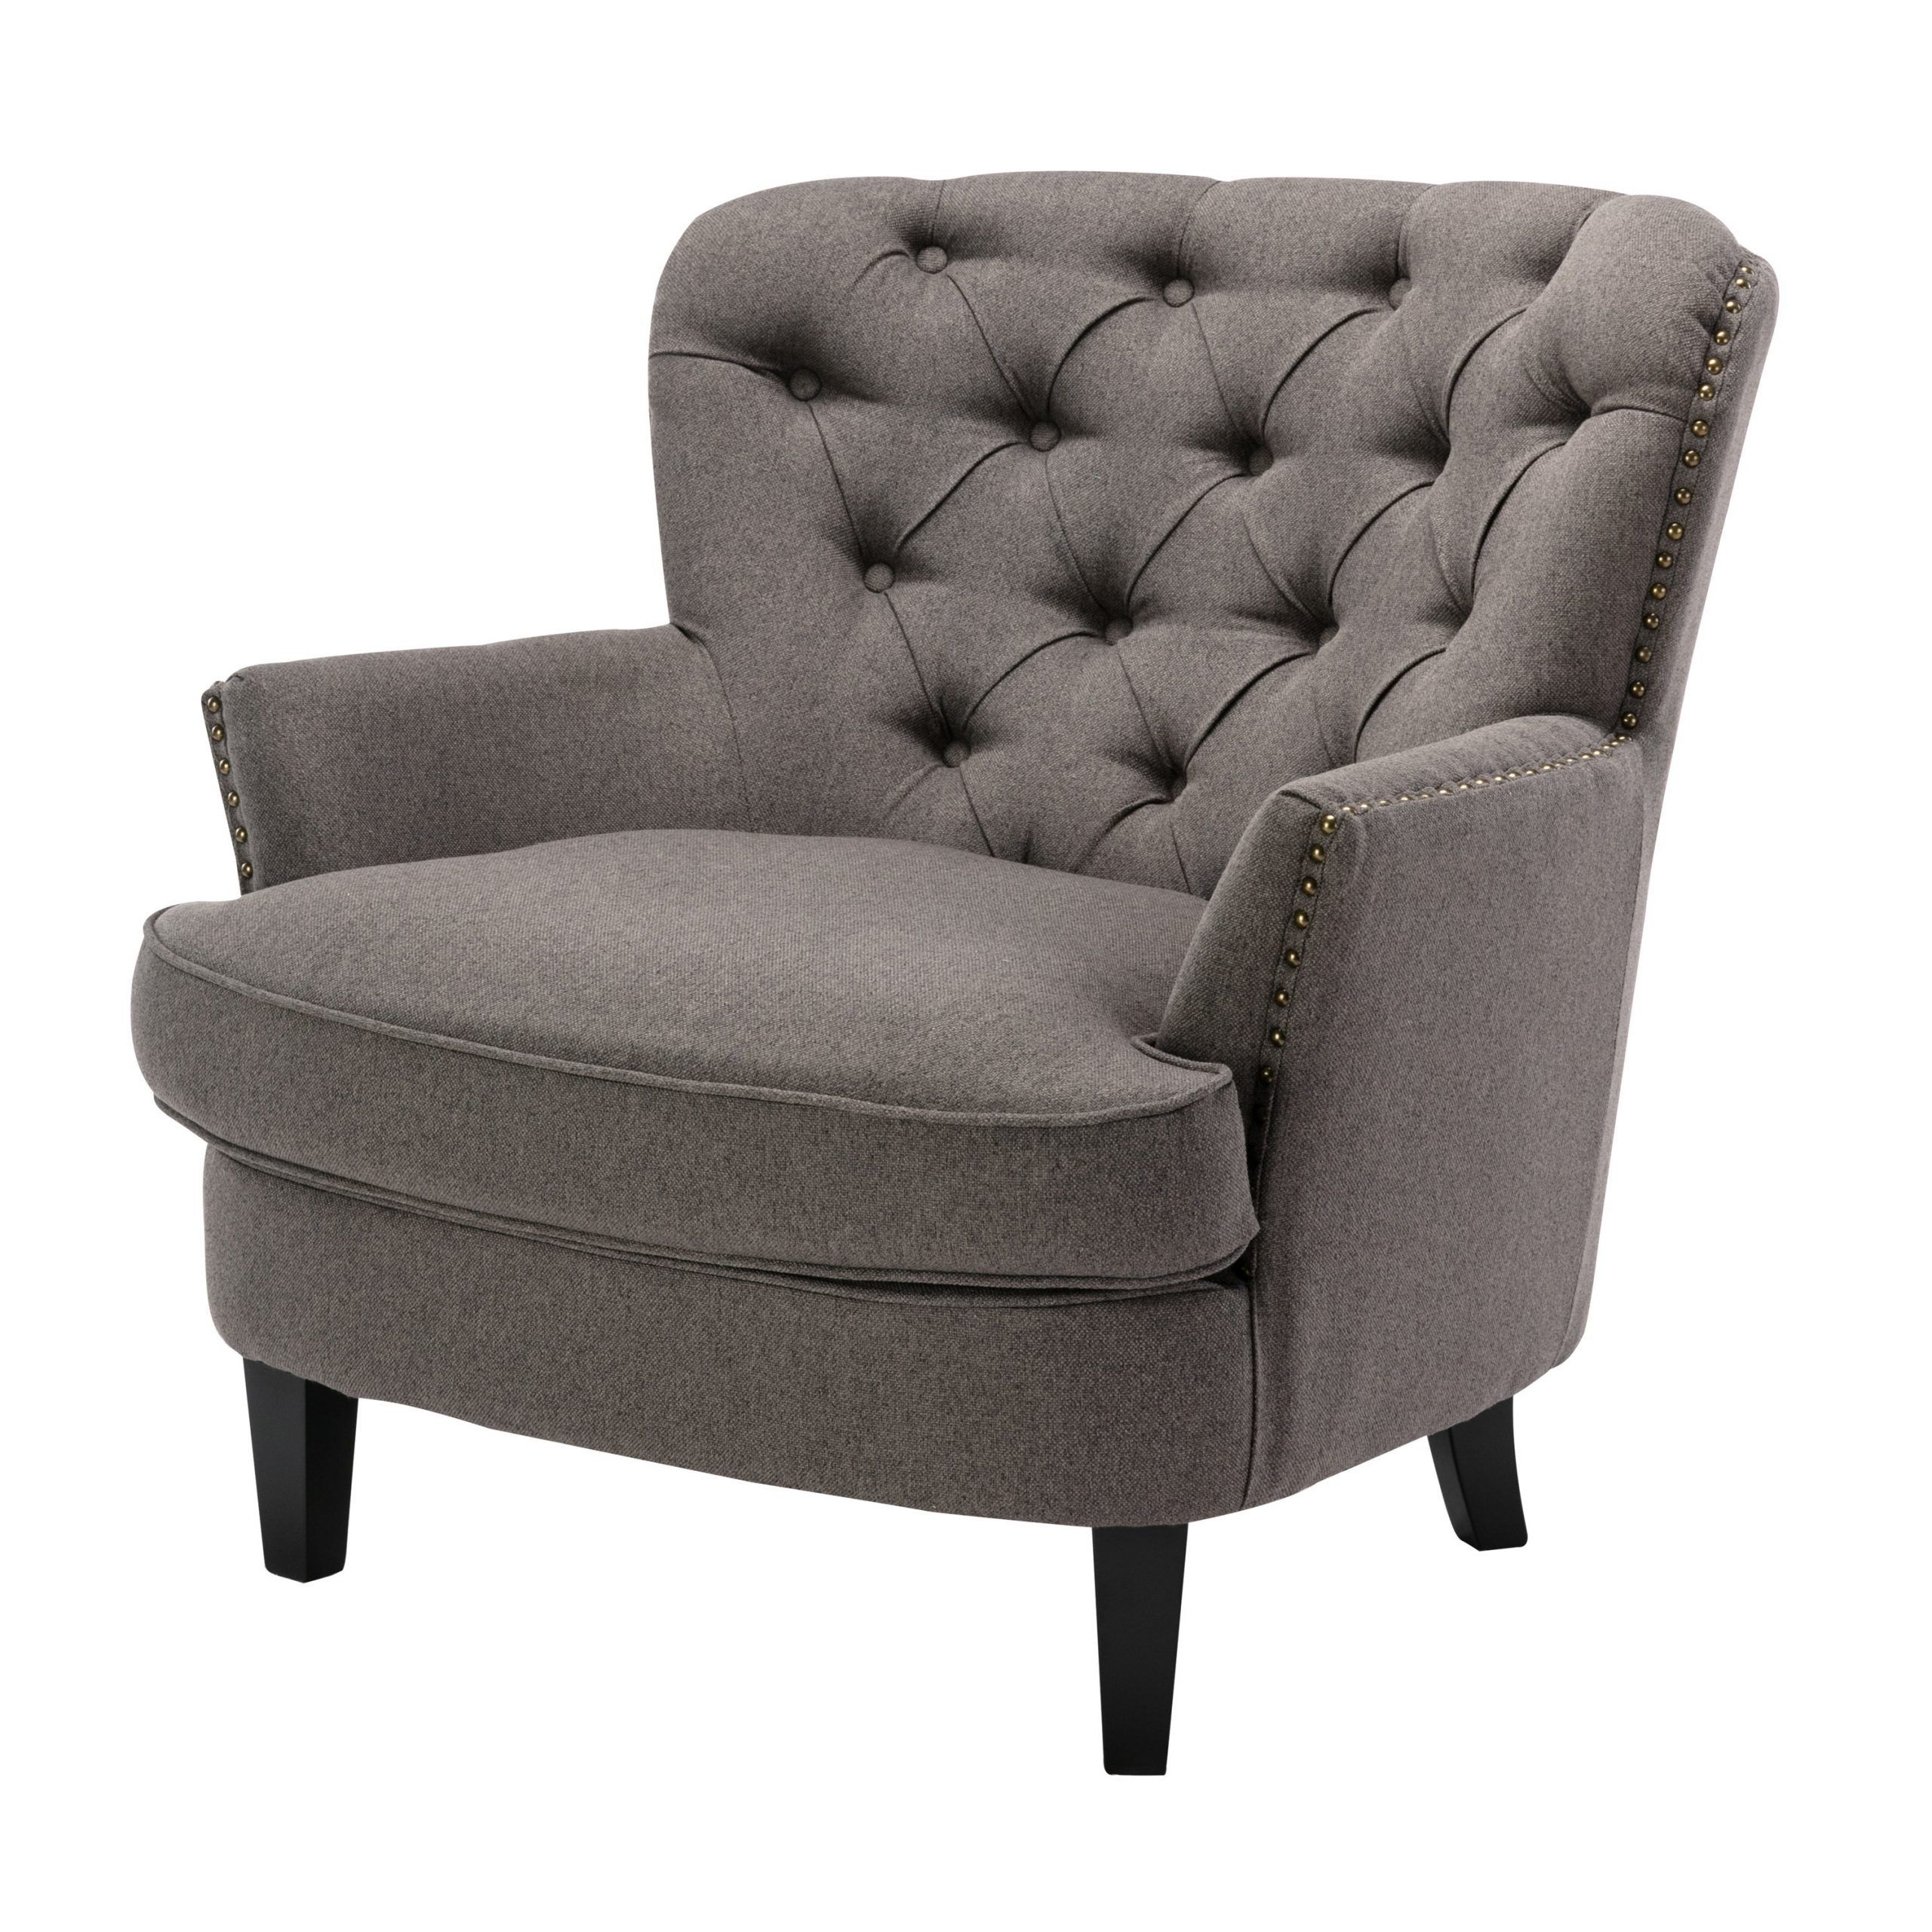 Preferred Nadene Armchairs For Accent Chairs You'll Love In  (View 6 of 20)